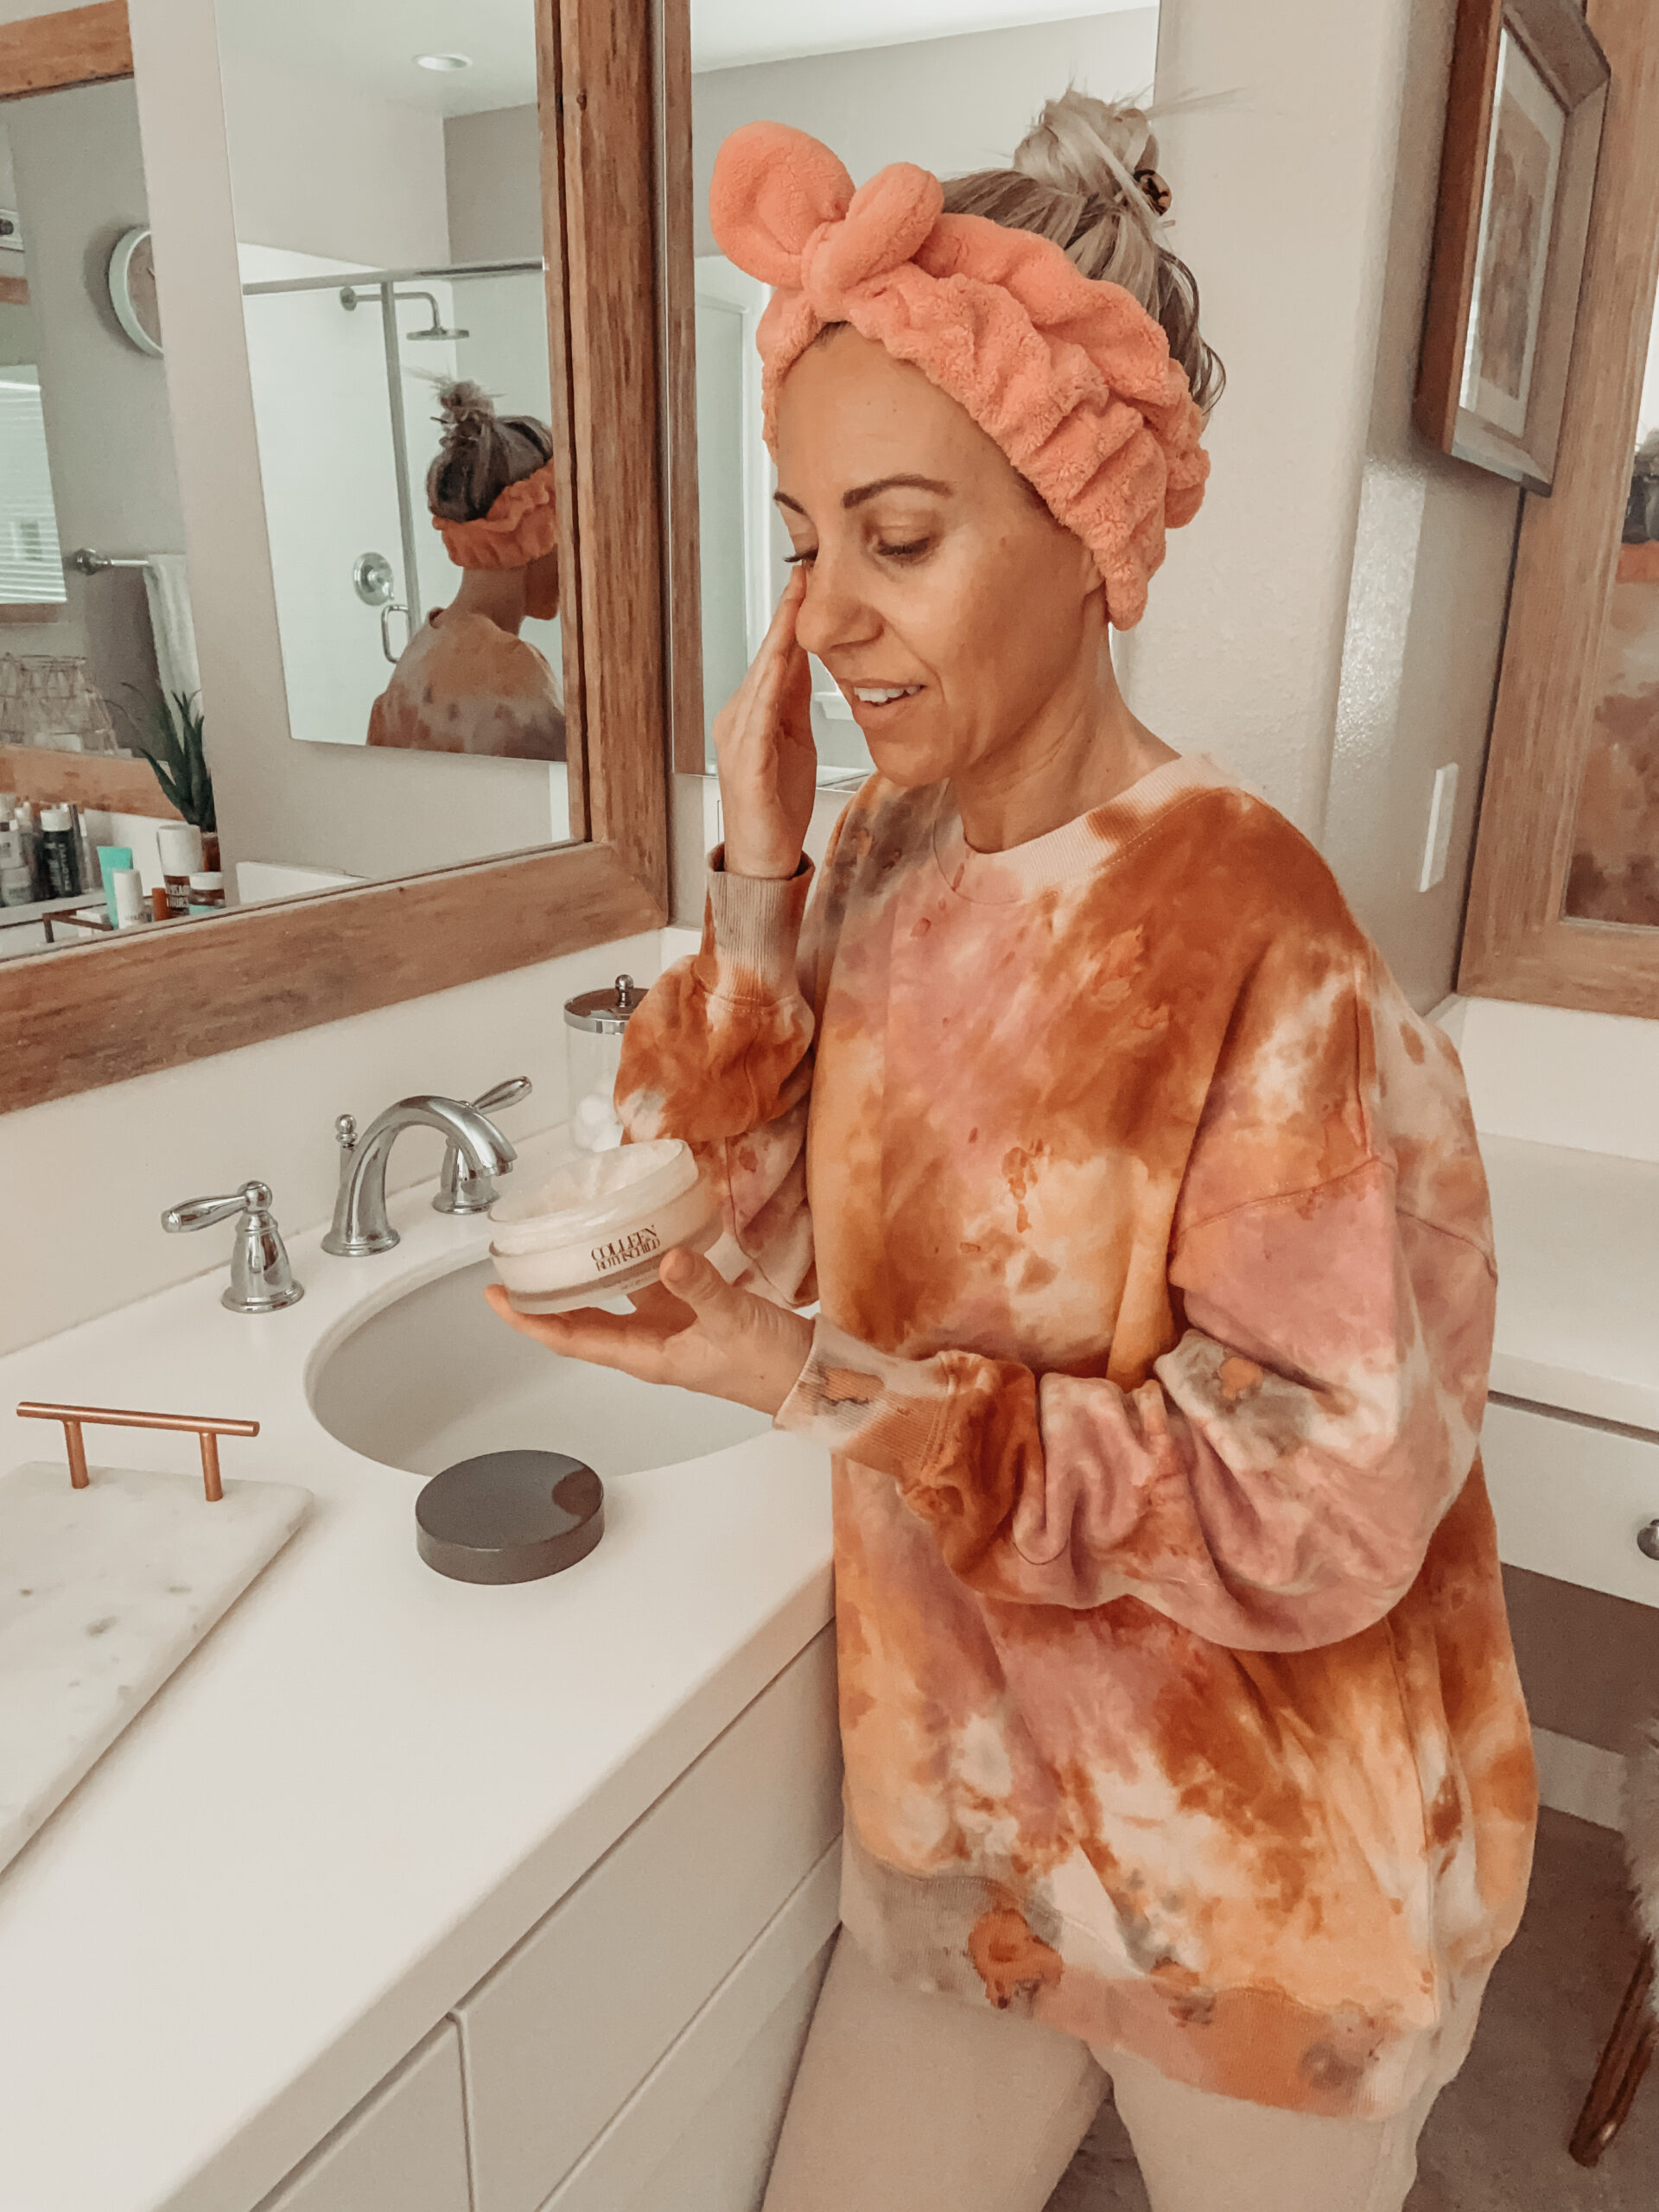 CLEANSING BALM- WHY YOU NEED TO ADD IT TO YOUR SKINCARE ROUTINE- Jaclyn De Leon Style + sharing why I love my cleansing balm and why it's a must have in your skincare routine. Also sharing my top 3 favorite cleansing balm products